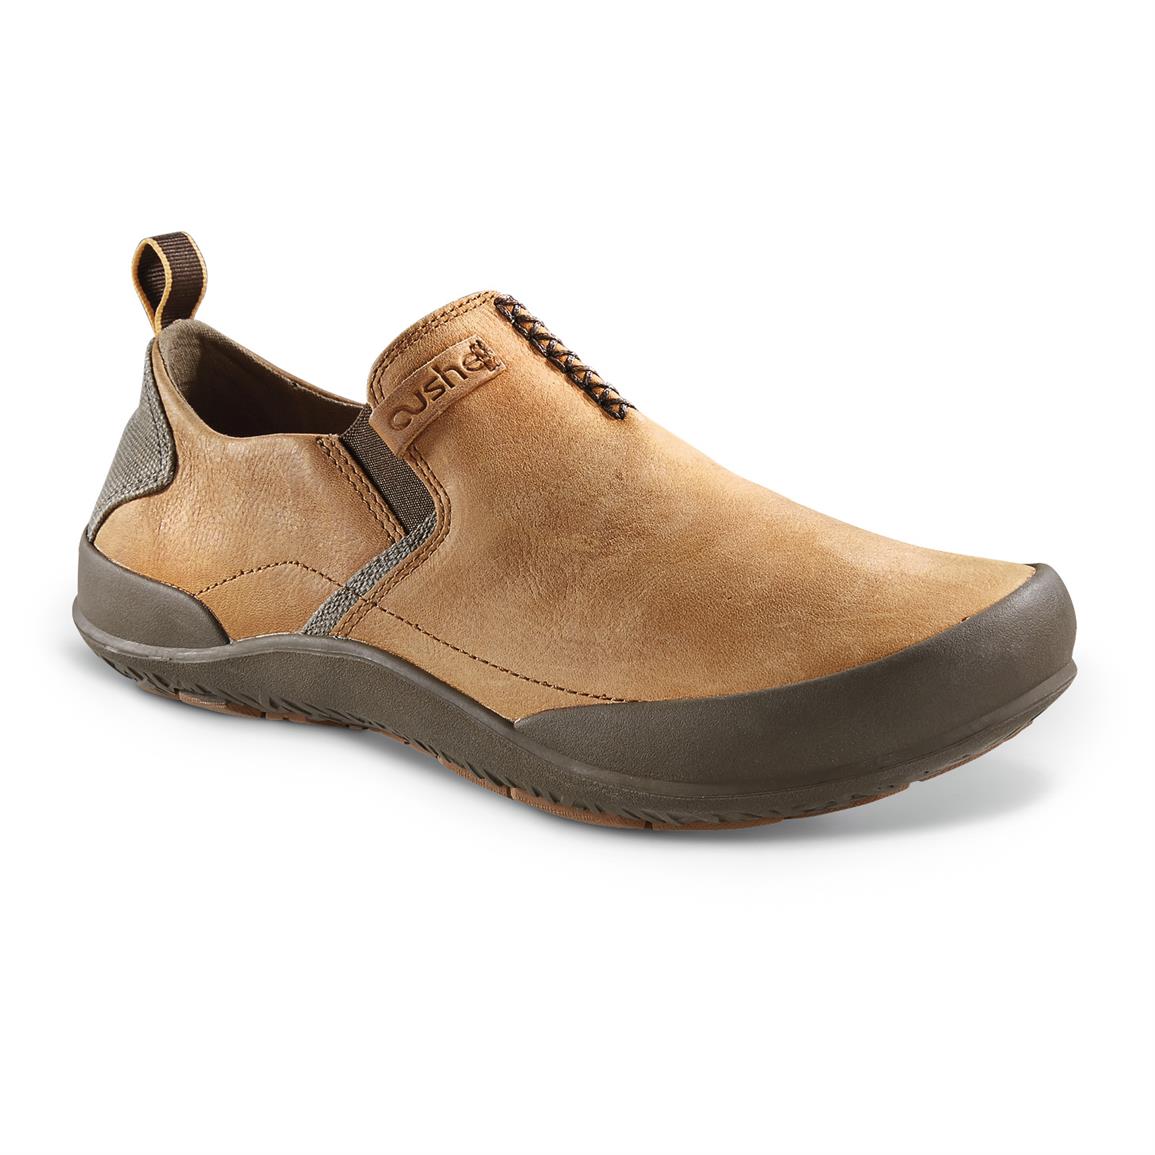 Cushe Swell Shoes - 643359, Casual Shoes at Sportsman's Guide